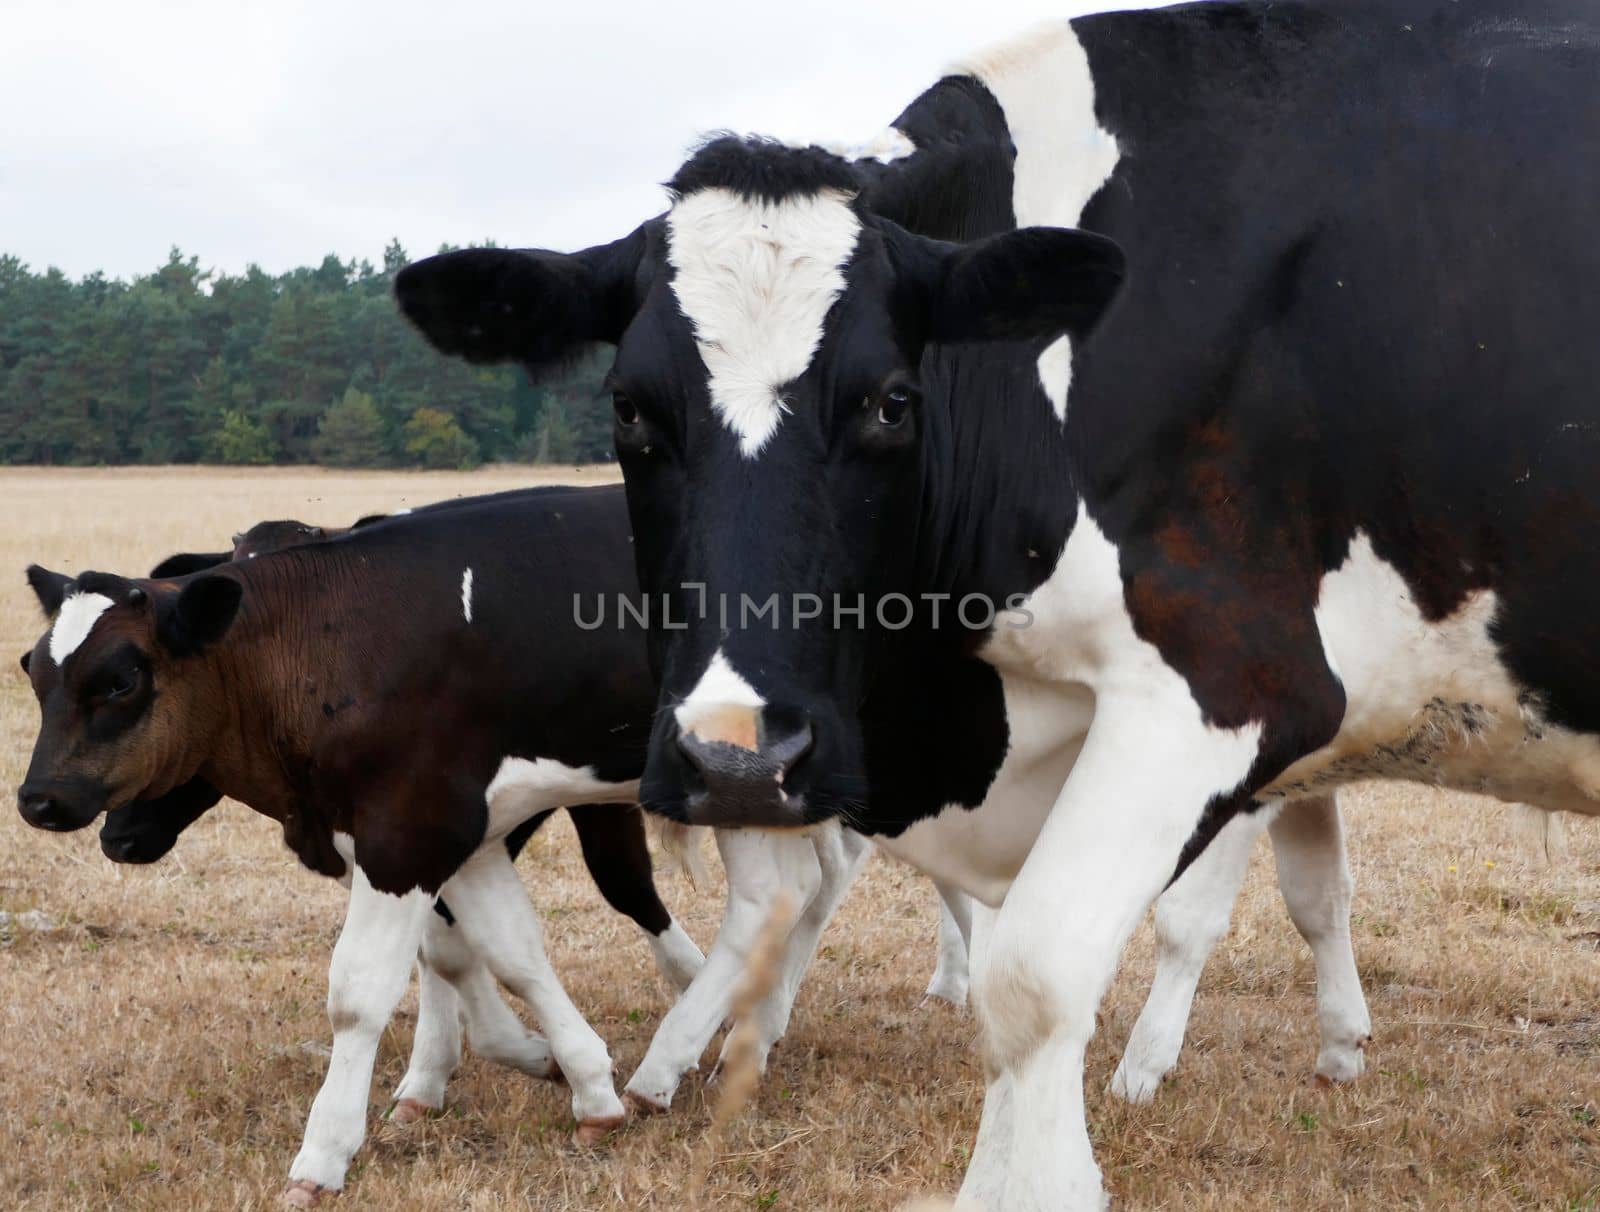 Holstein Friesian mother cow with calves on a meadow in Germany. The cow is looking at the camera